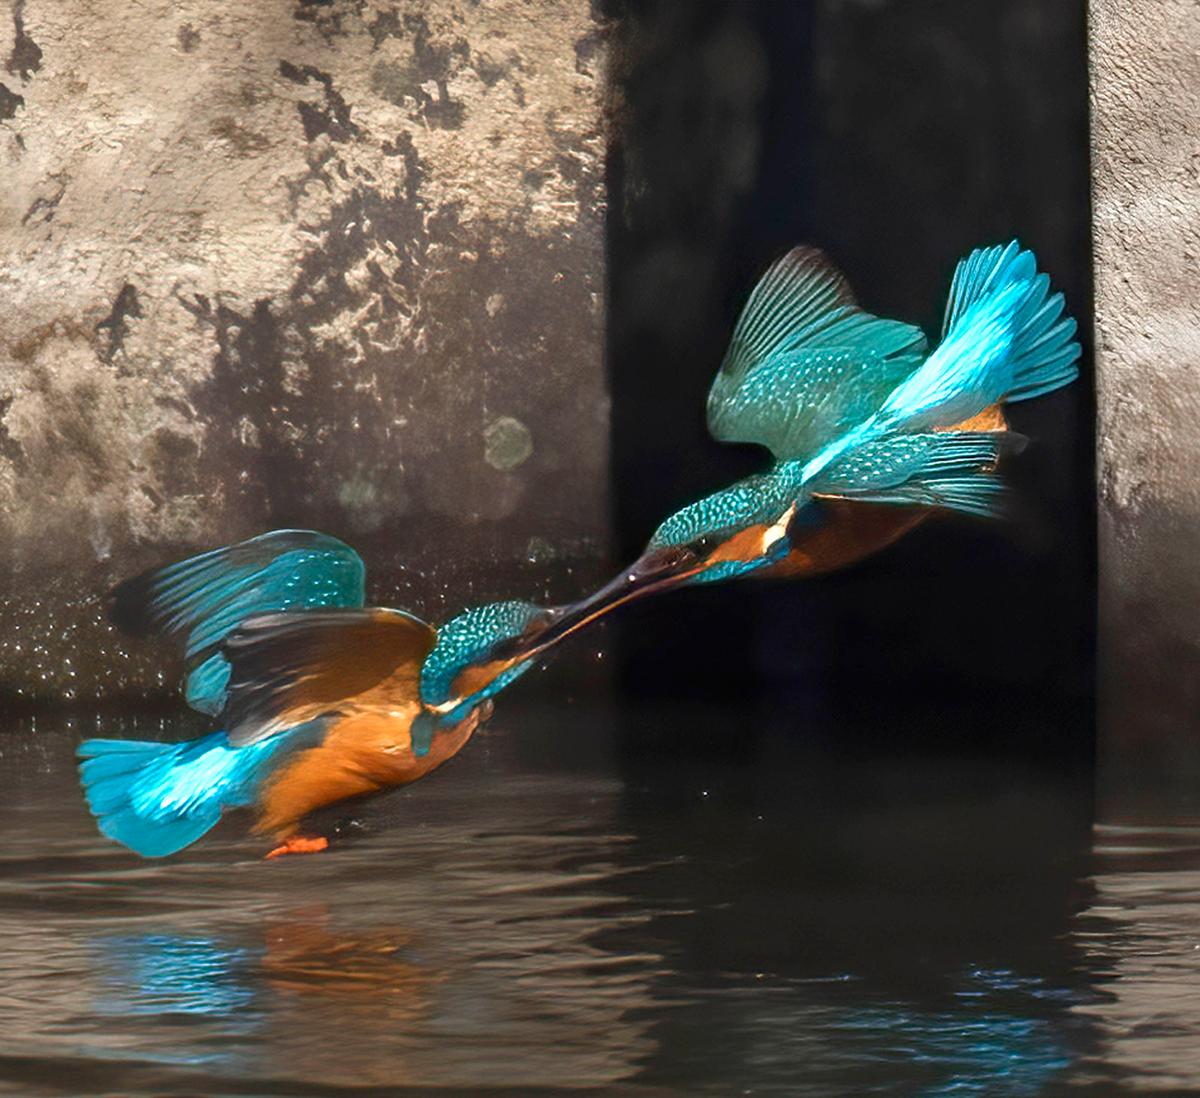 <span style="font-weight: 400;">"At first, I thought I was watching a pair on the far river bank when all of a sudden they flew towards each other and locked bills in mid-air." (Caters News)</span>